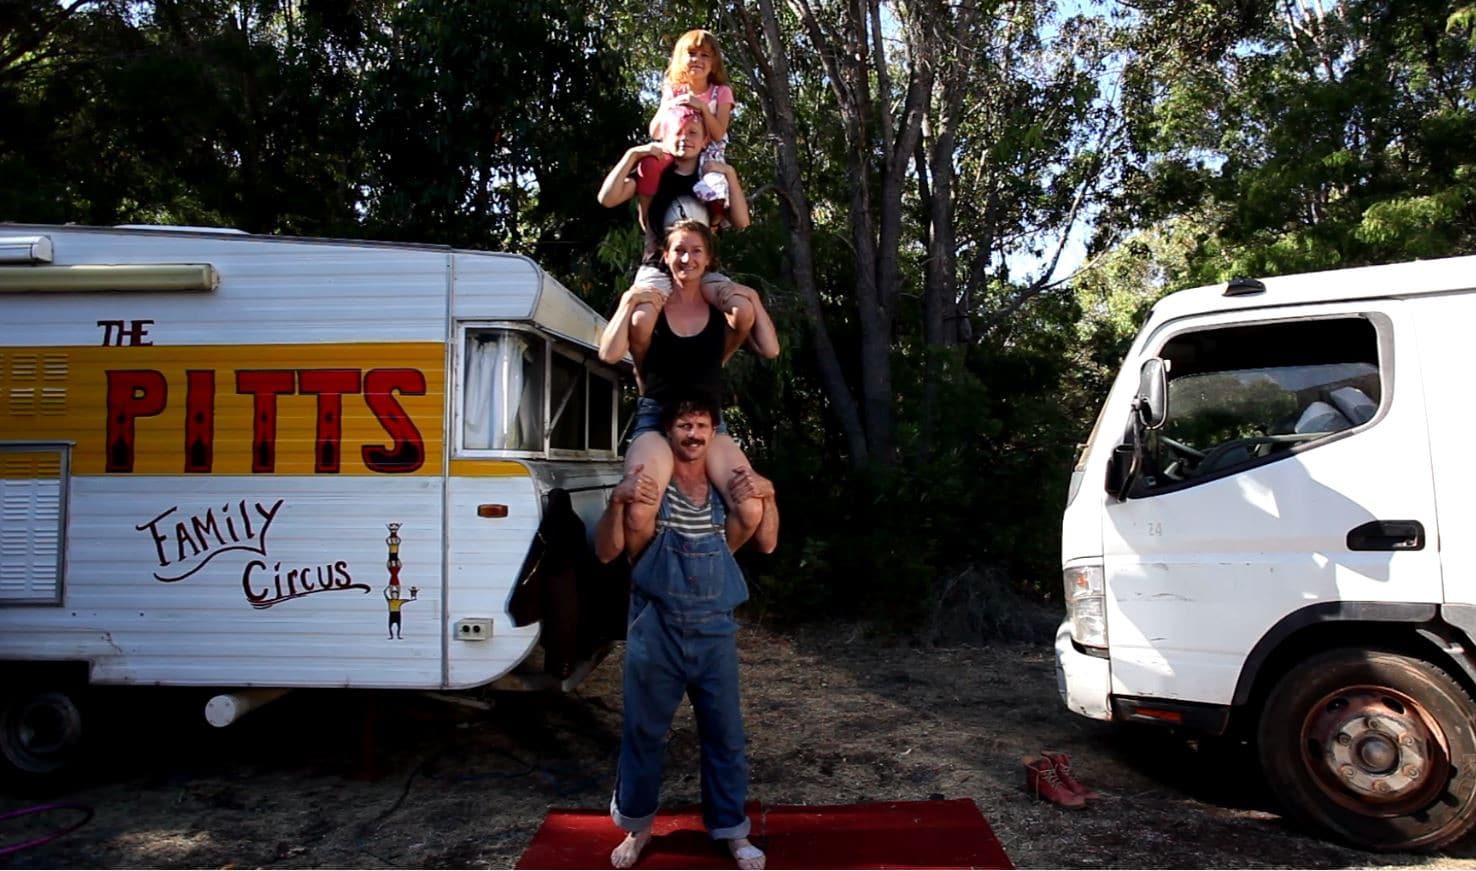 Pitts Family Circus